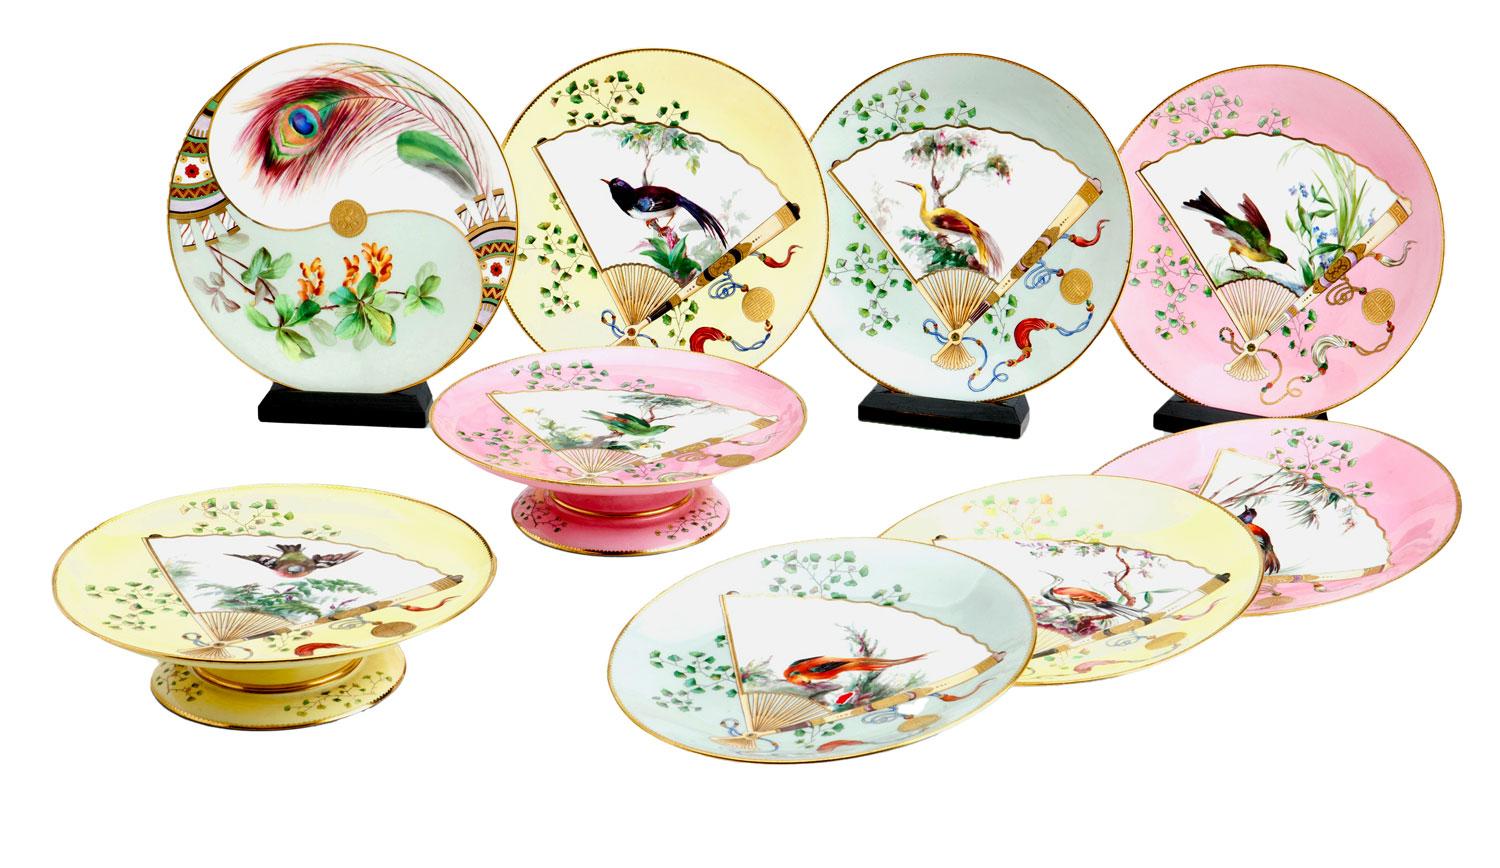 Gilt Christopher Dresser Aesthetic movement Japonism style Pink Minton Plate 1876 For Sale